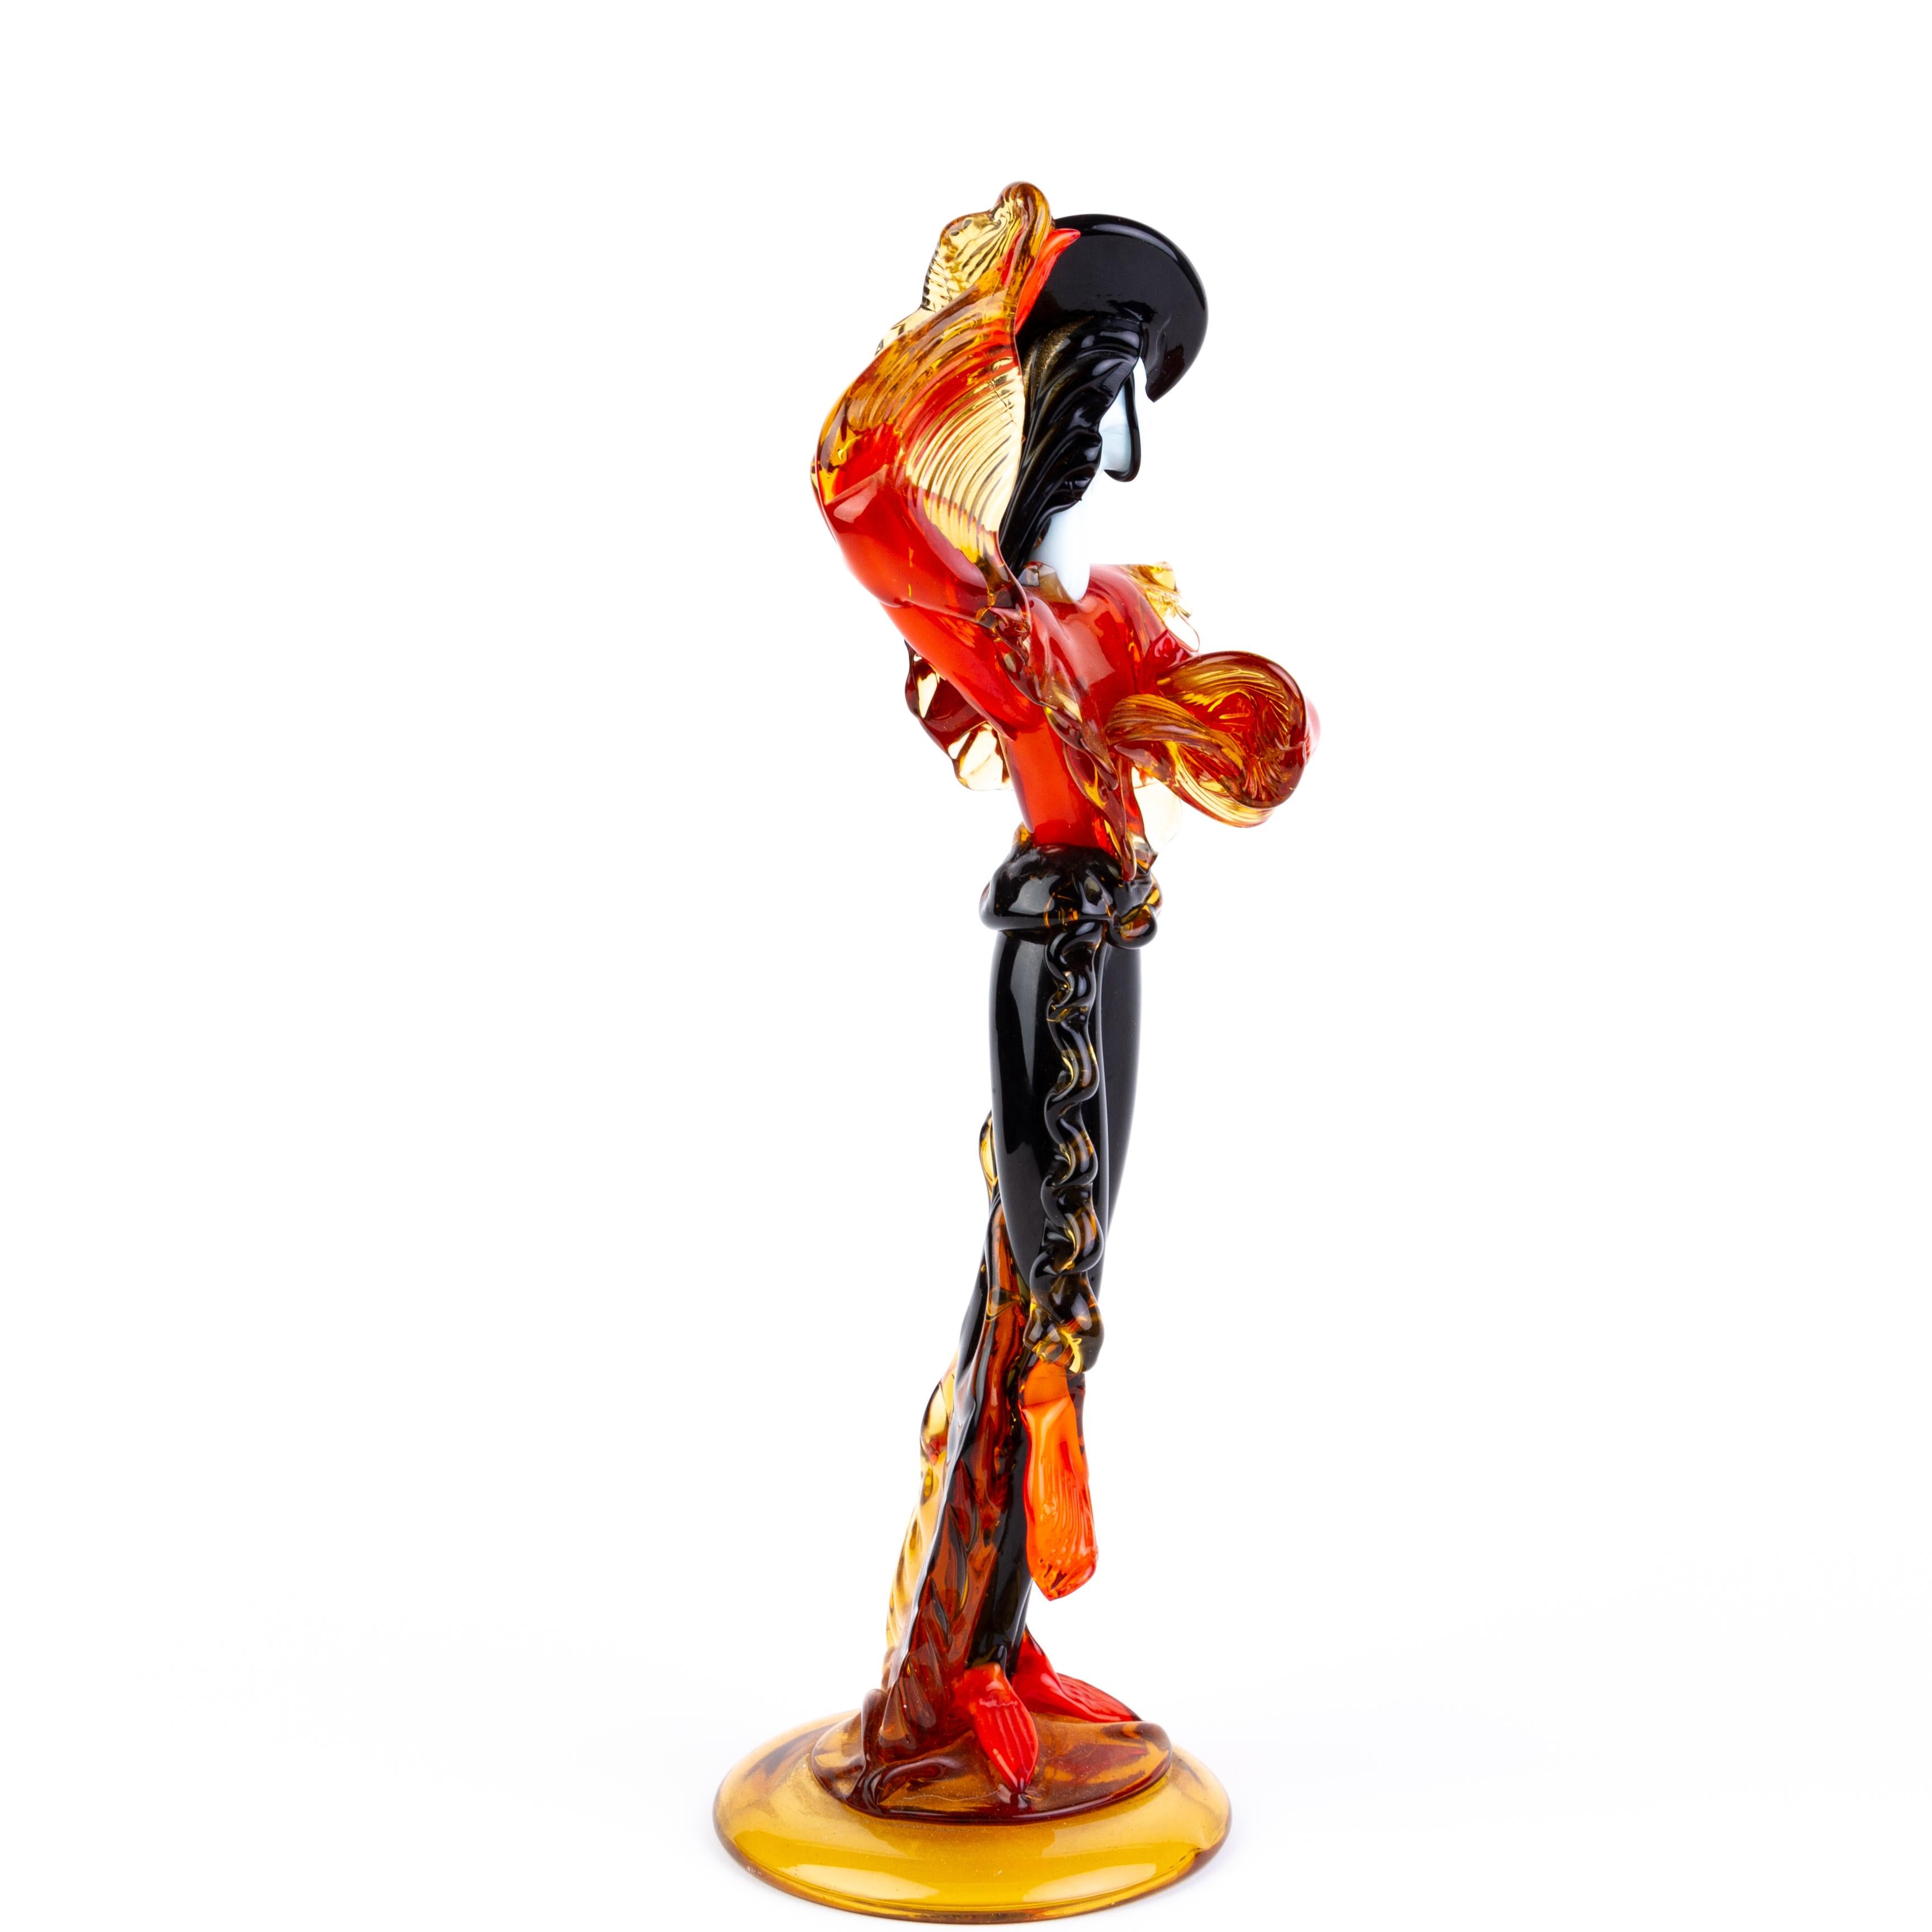 Italian Venetian Murano Glass Flamenco Dancer Sculpture by Franco Toffolo 
Good condition
From a private collection.
Free international shipping.